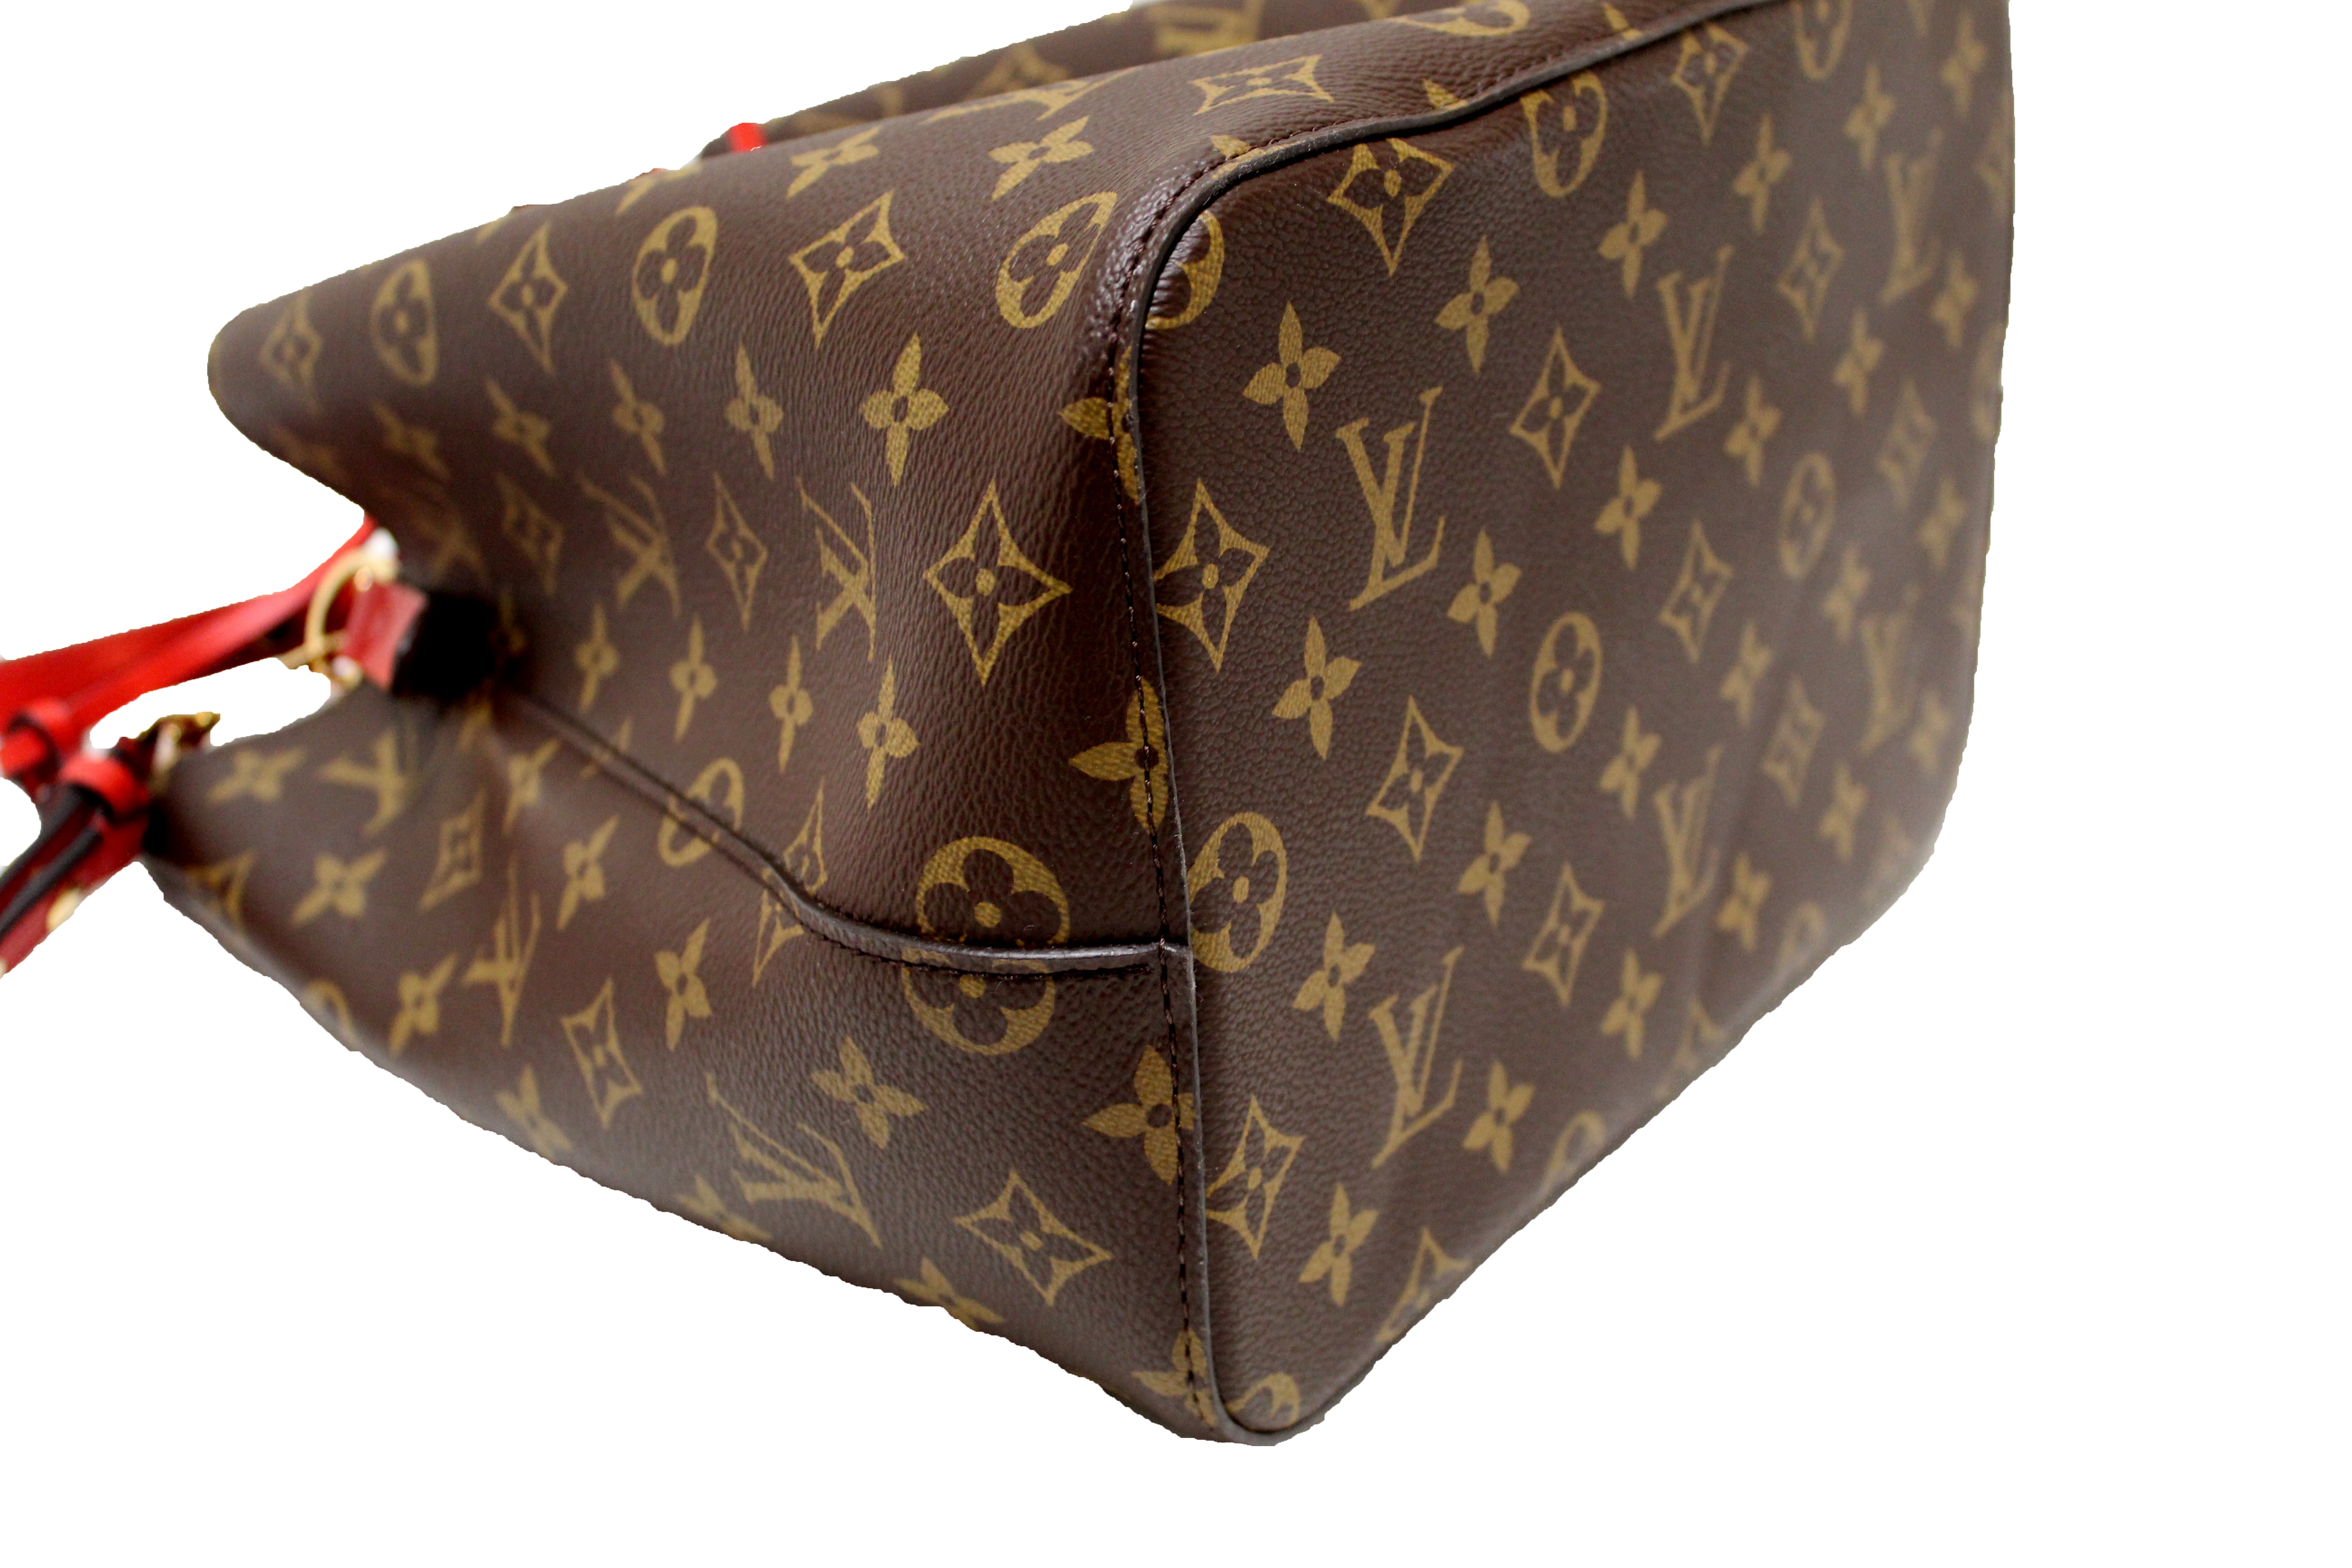 Classic Brown Louis Vuitton Handbag with red lining